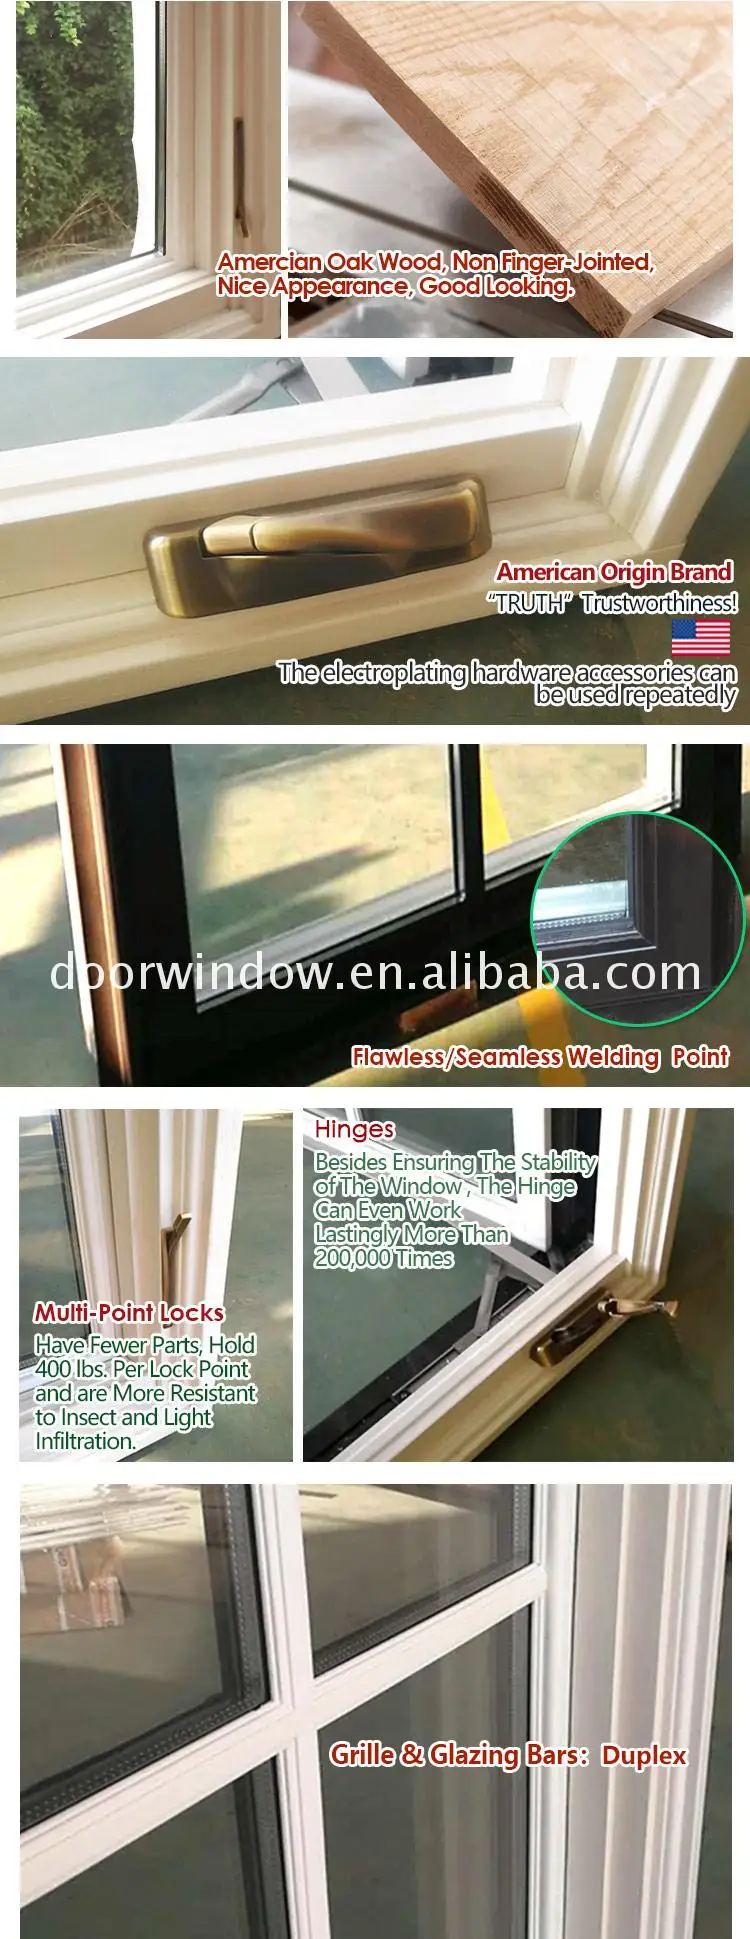 Hot sell large round windows for sale picture window laminated glass non-thermal break